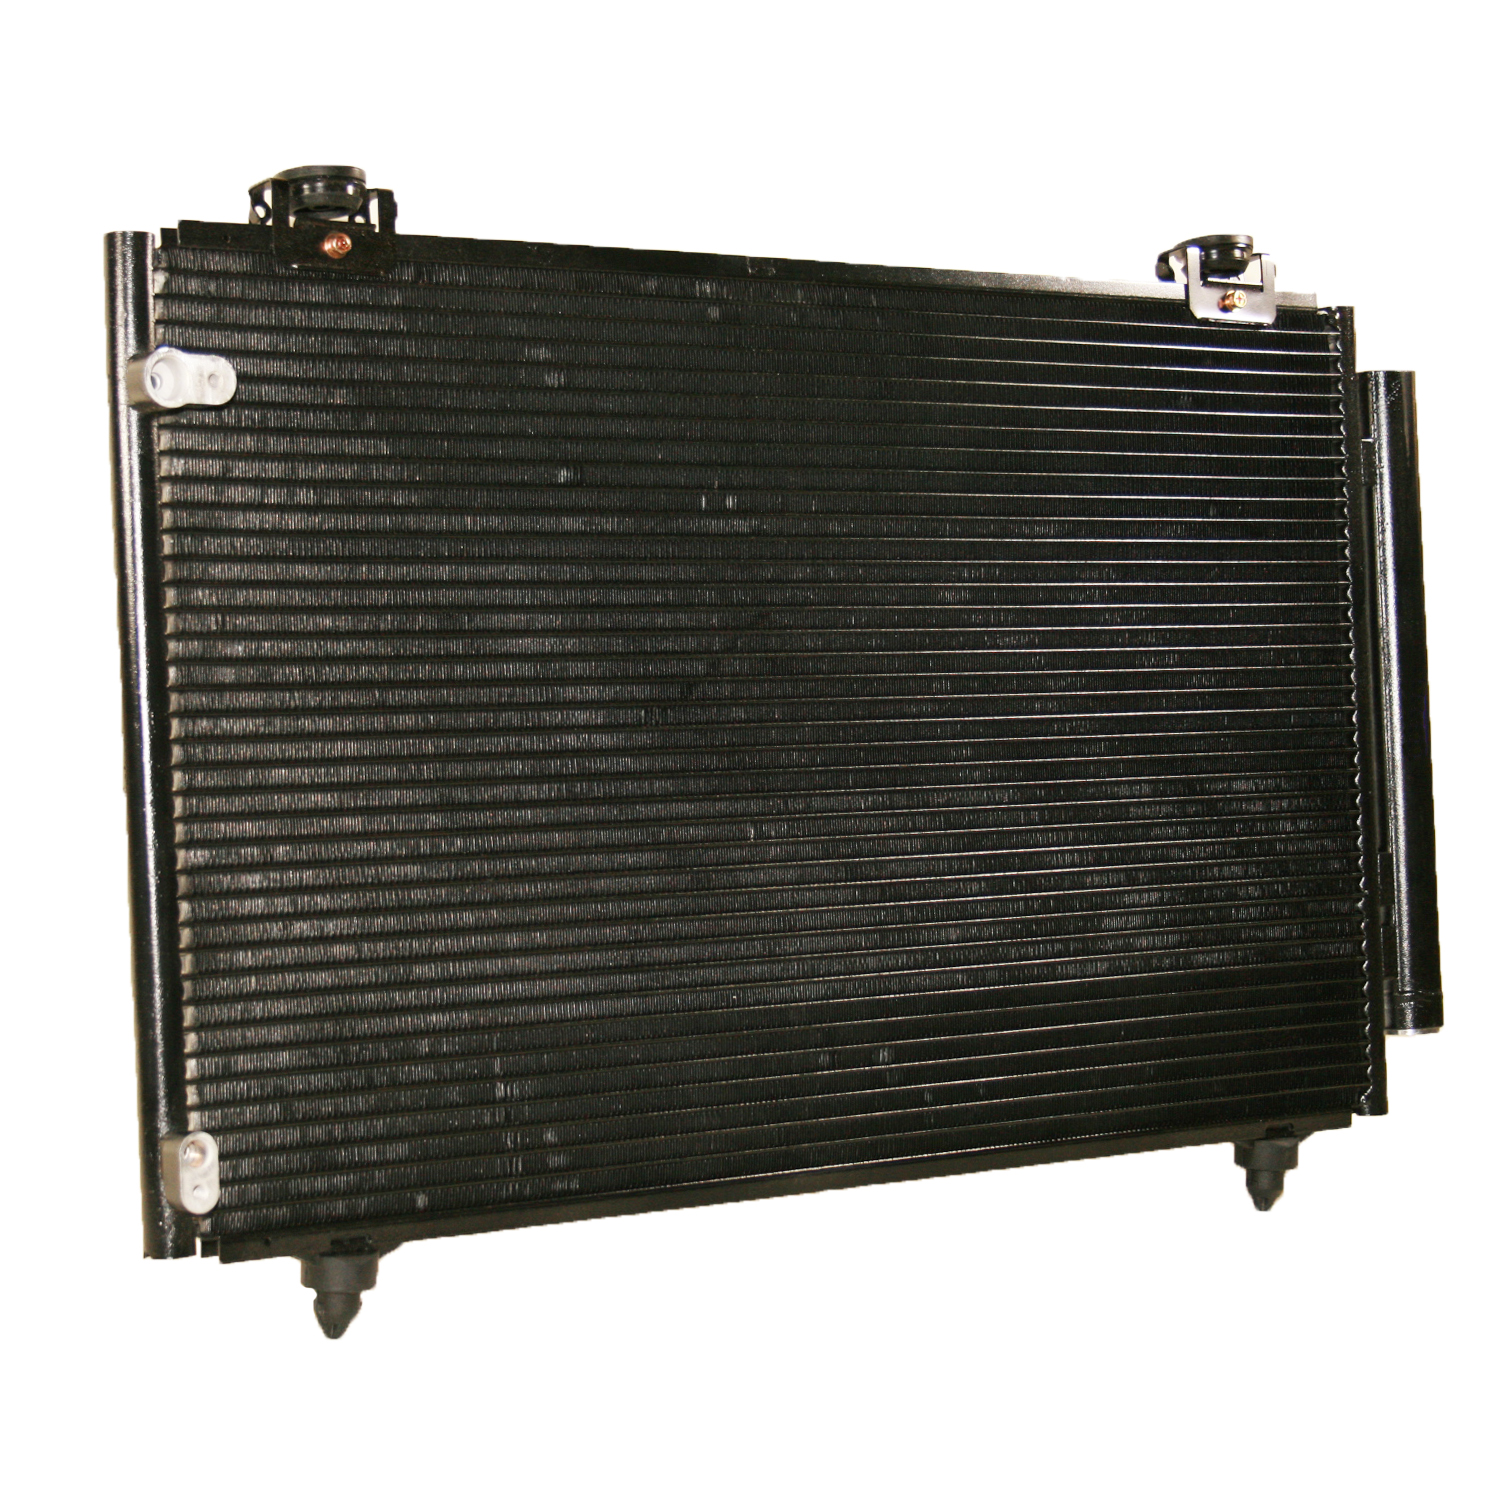 TCW Condenser 44-3299 New Product Image field_60b6a13a6e67c